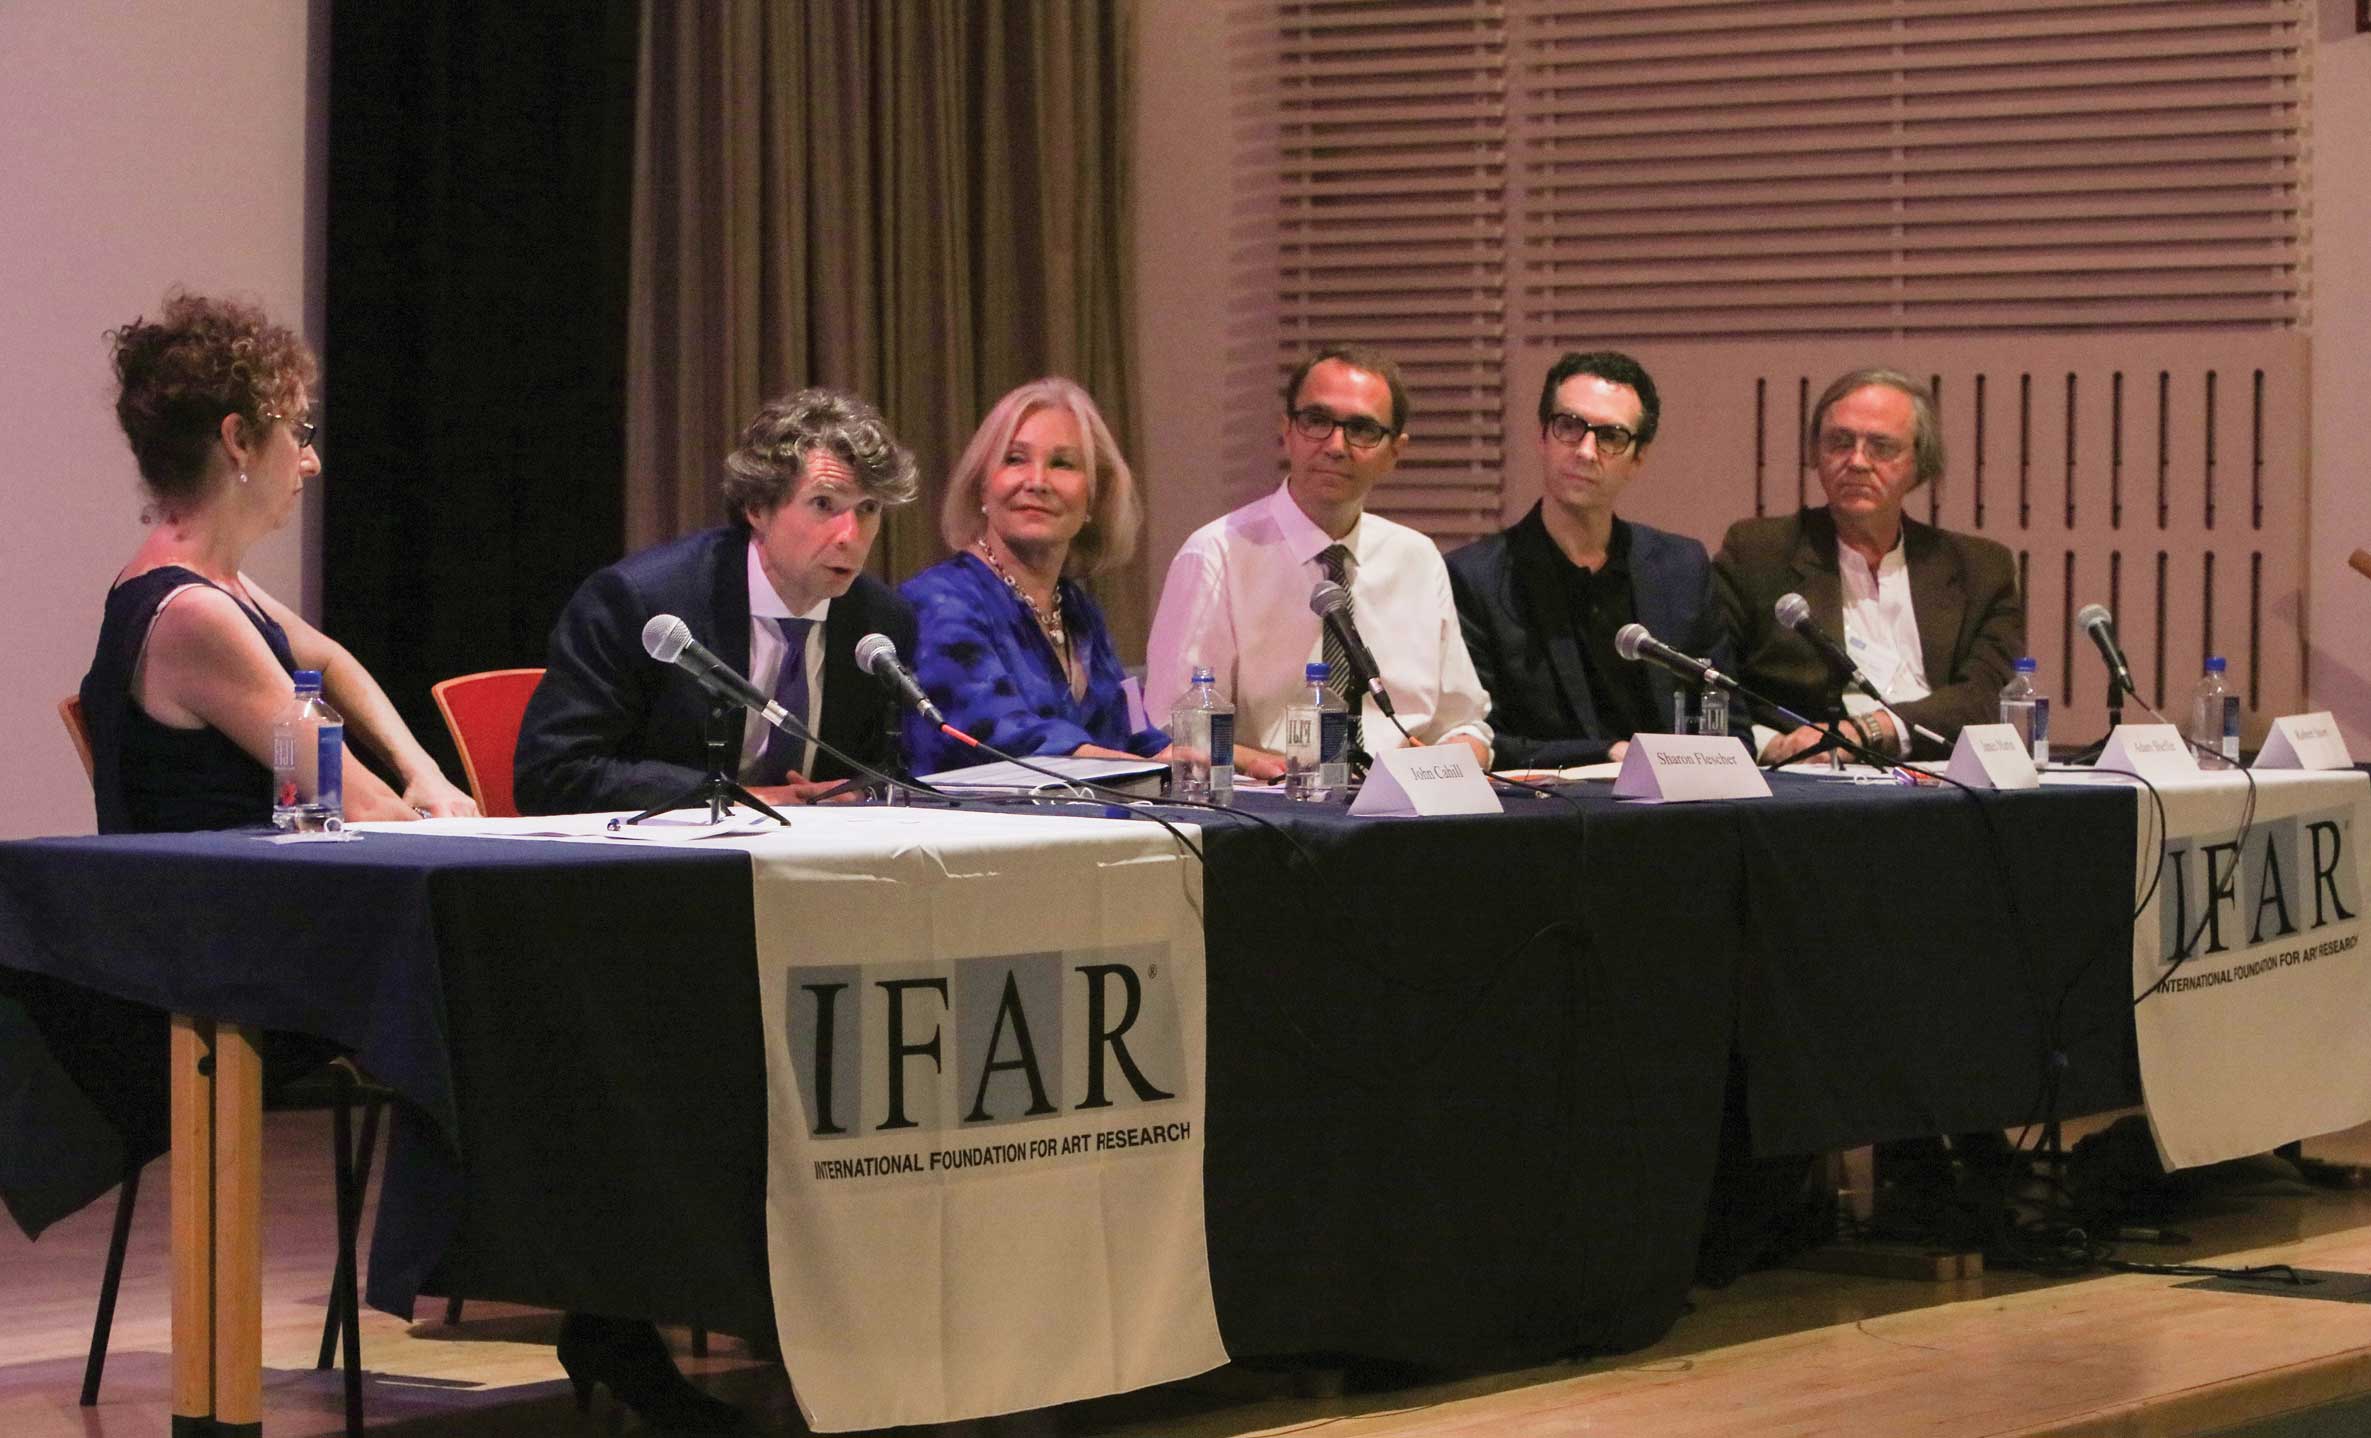 Participants in “20/20 Hindsight: Lessons from the Knoedler/Rosales Affair,” an IFAR Evening panel held in July 2016. Left to right: Patricia Cohen (who broke the story of this affair in The New York Times), John Cahill, Sharon Flescher, James Martin, Adam Sheffer, Robert Storr. Photo: Steven Tucker